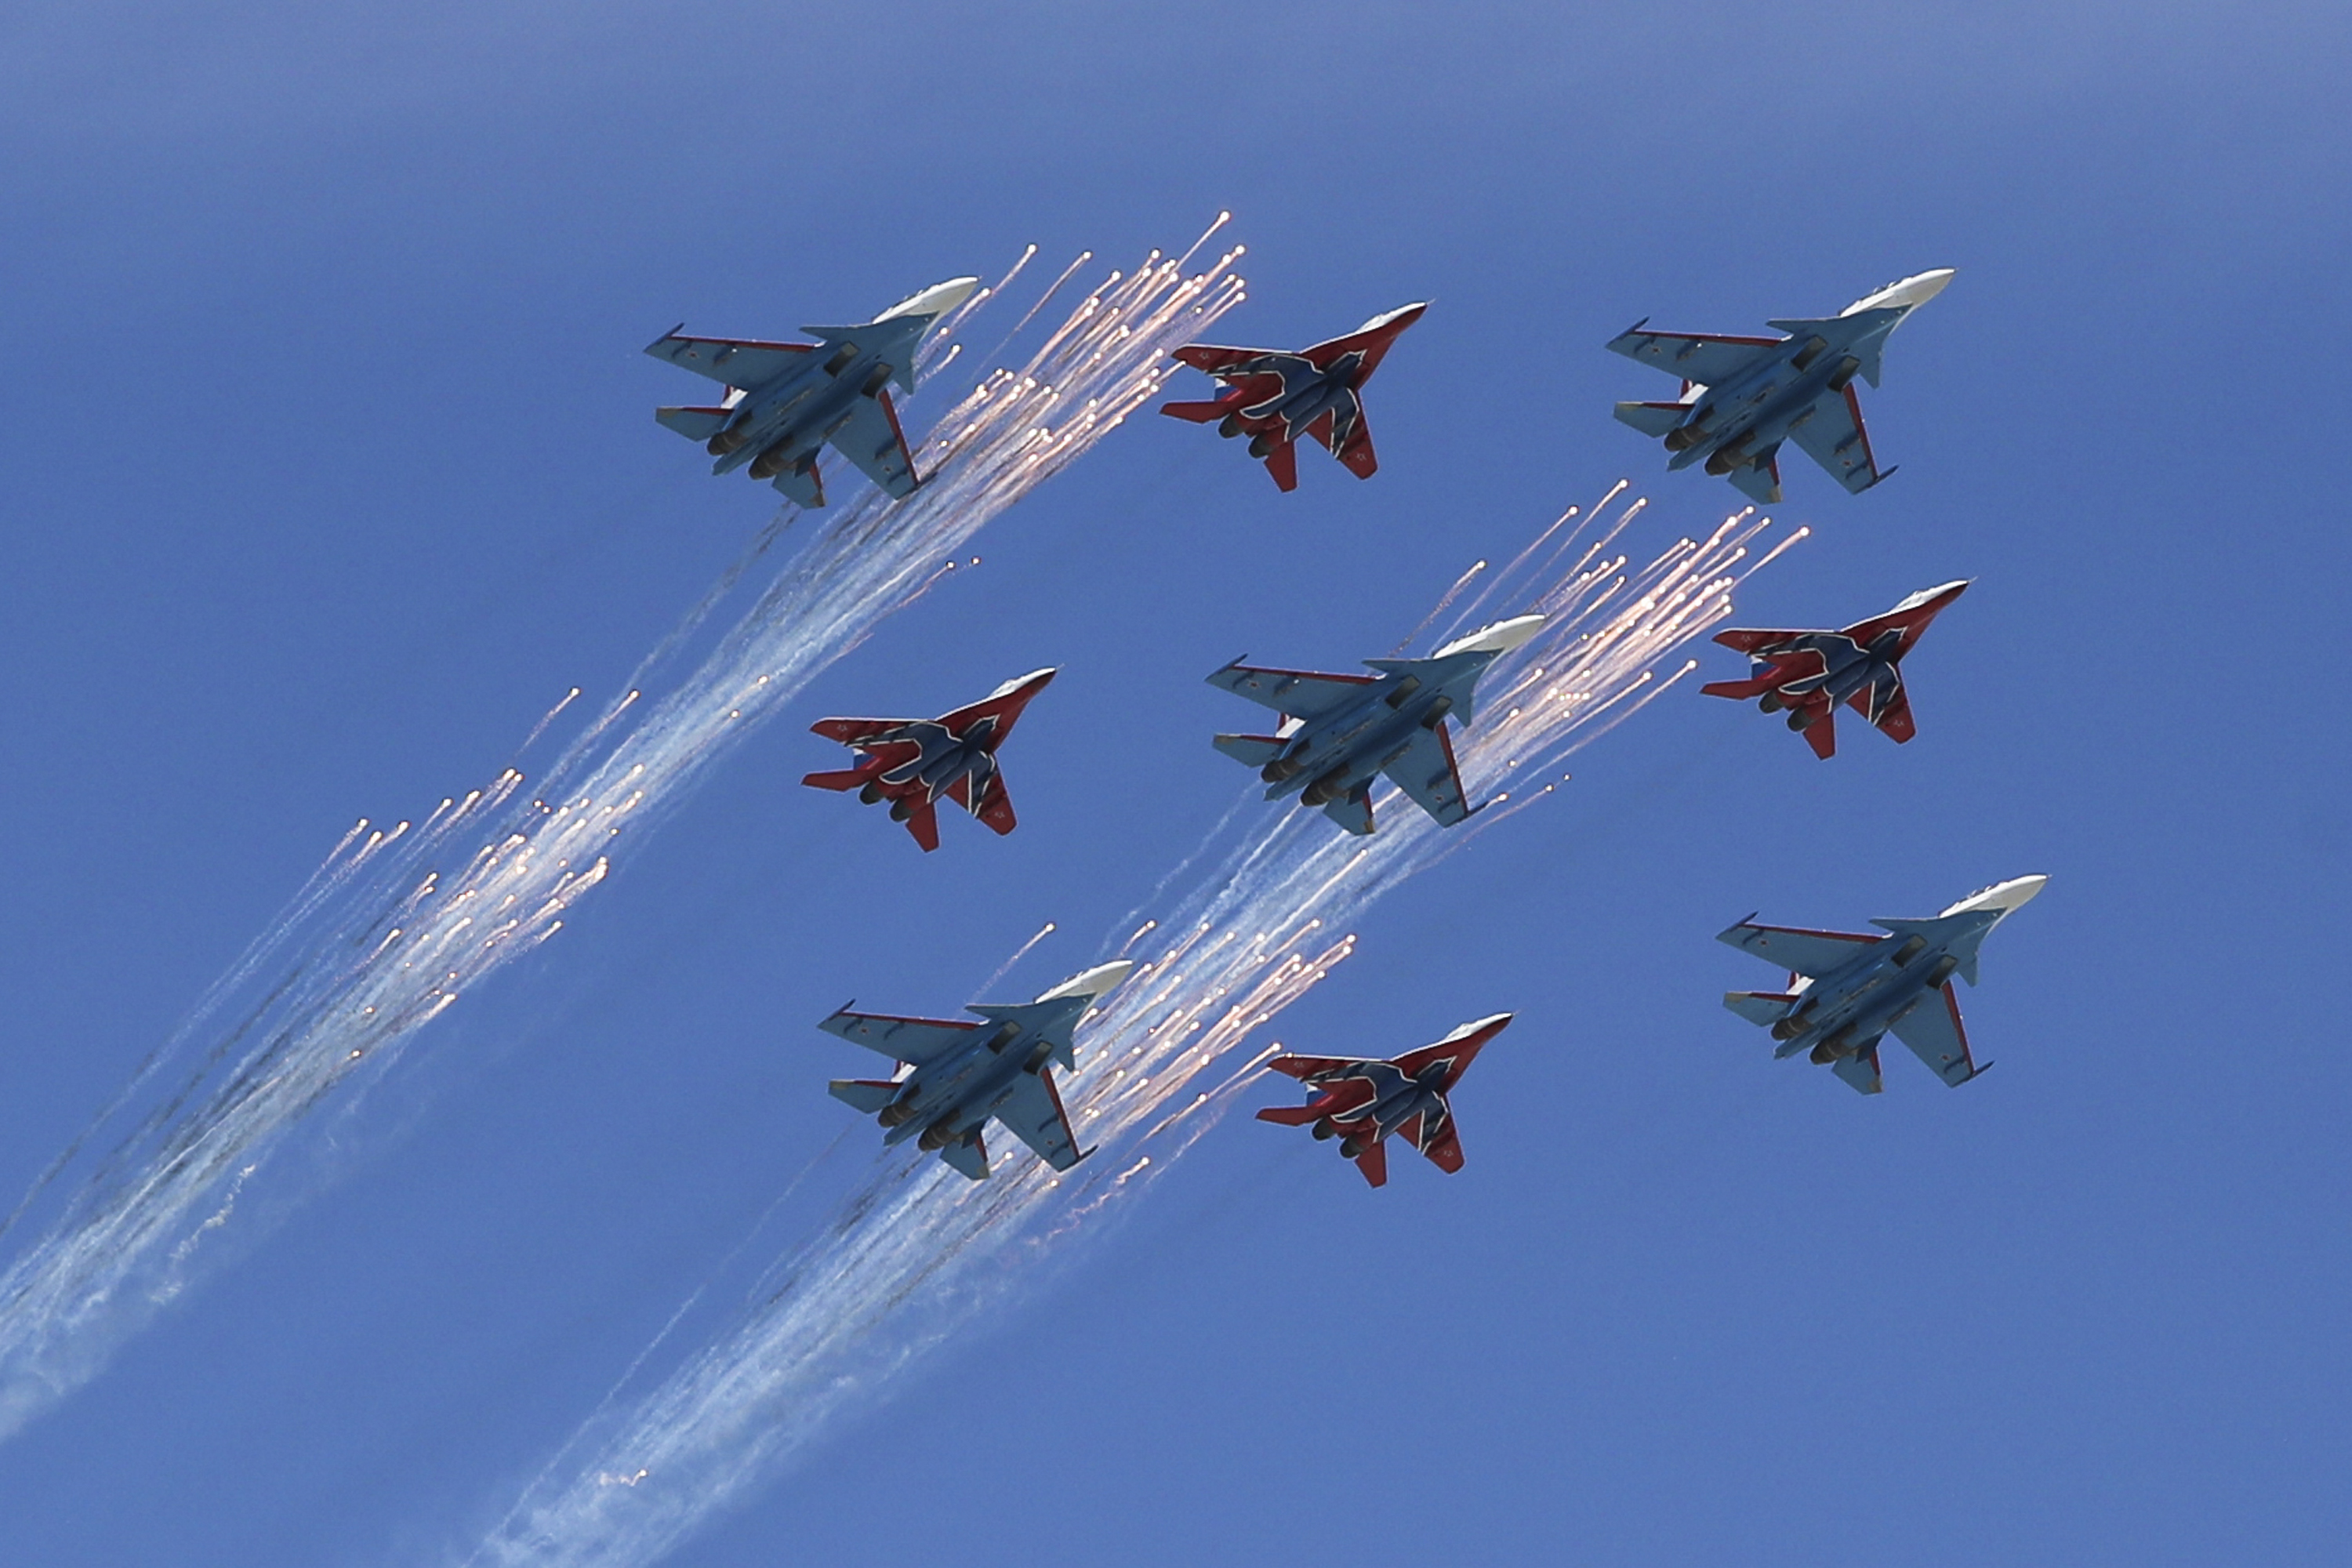 Mr Putin said the Russian air force would receive 160 new aircraft this year (Pavel Golovkin/AP)